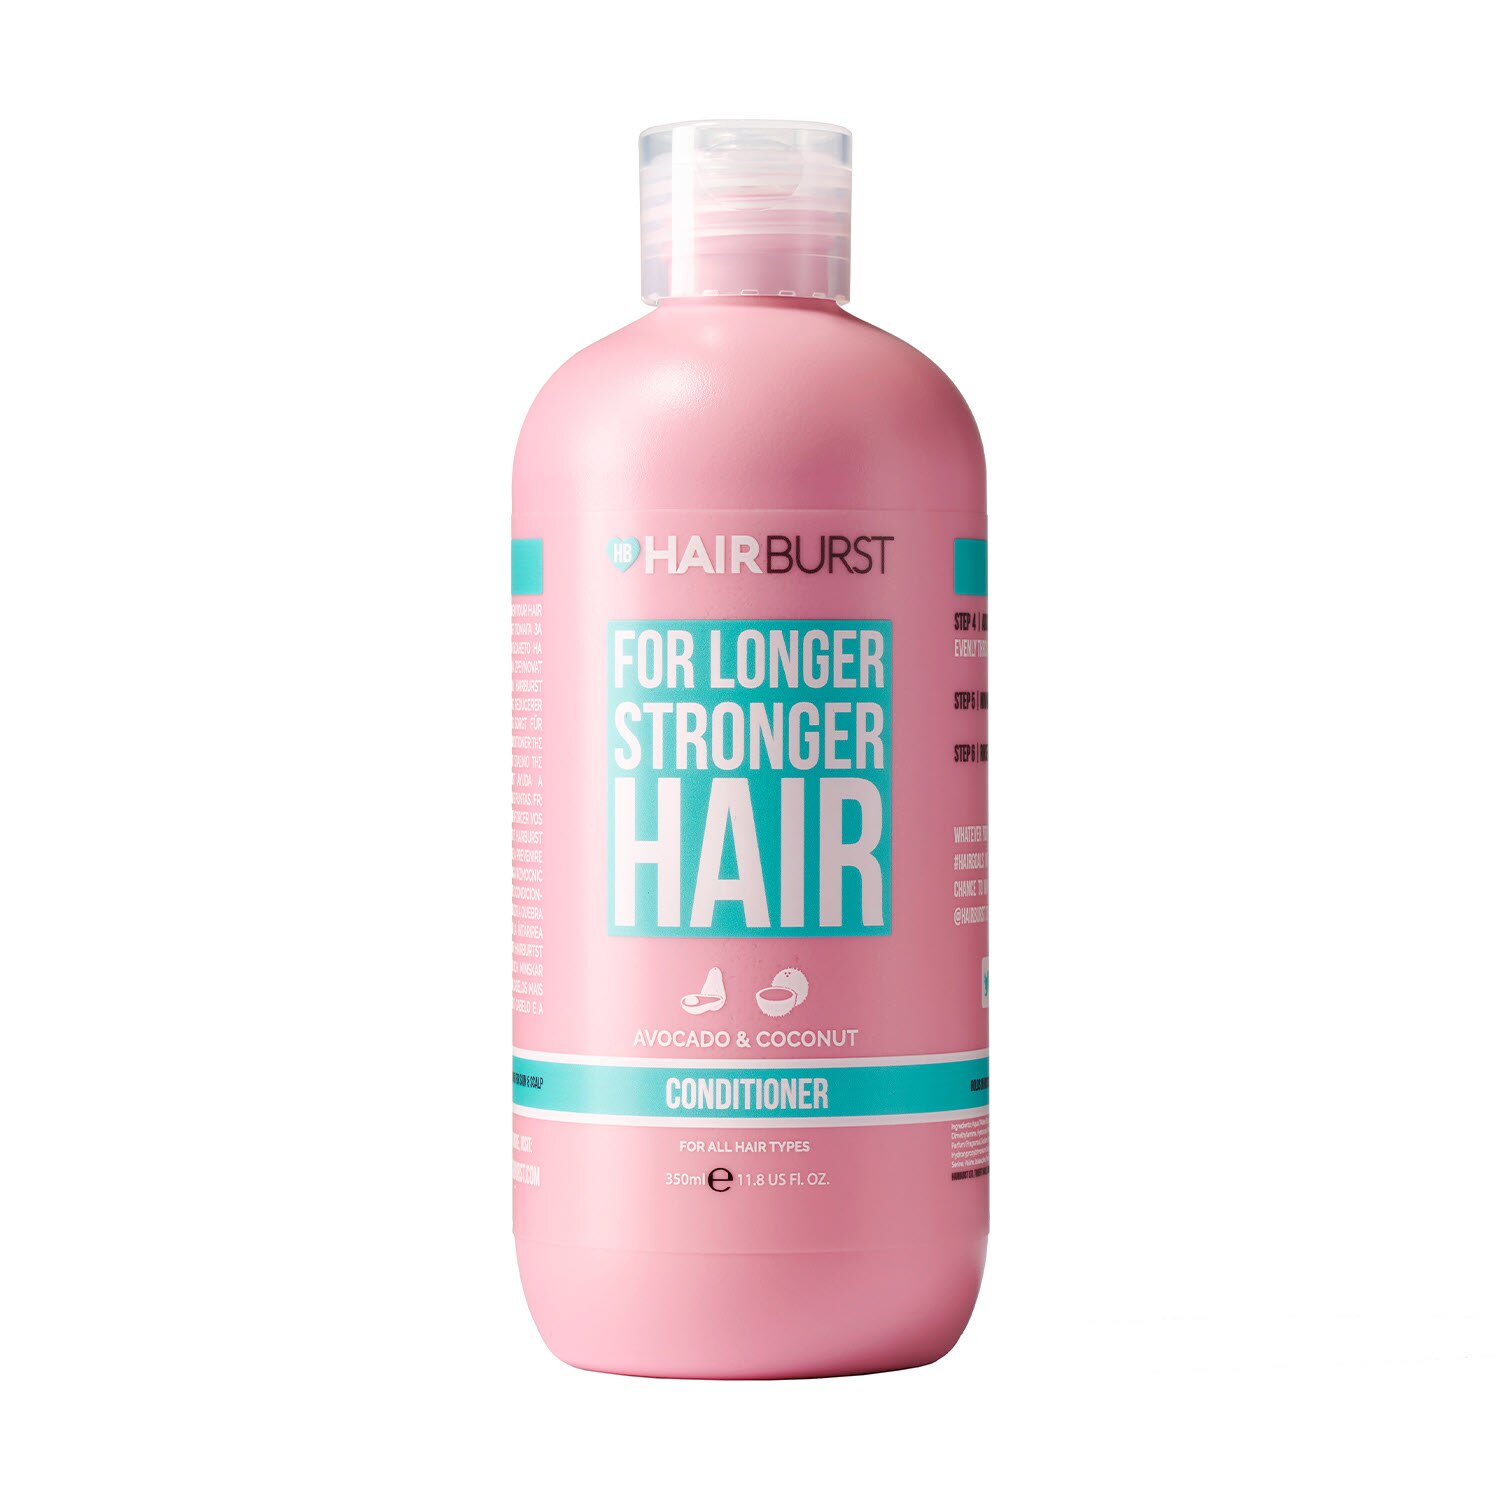 Hairburst Conditioner for Longer, Stronger Looking Hair, 11.8 OZ